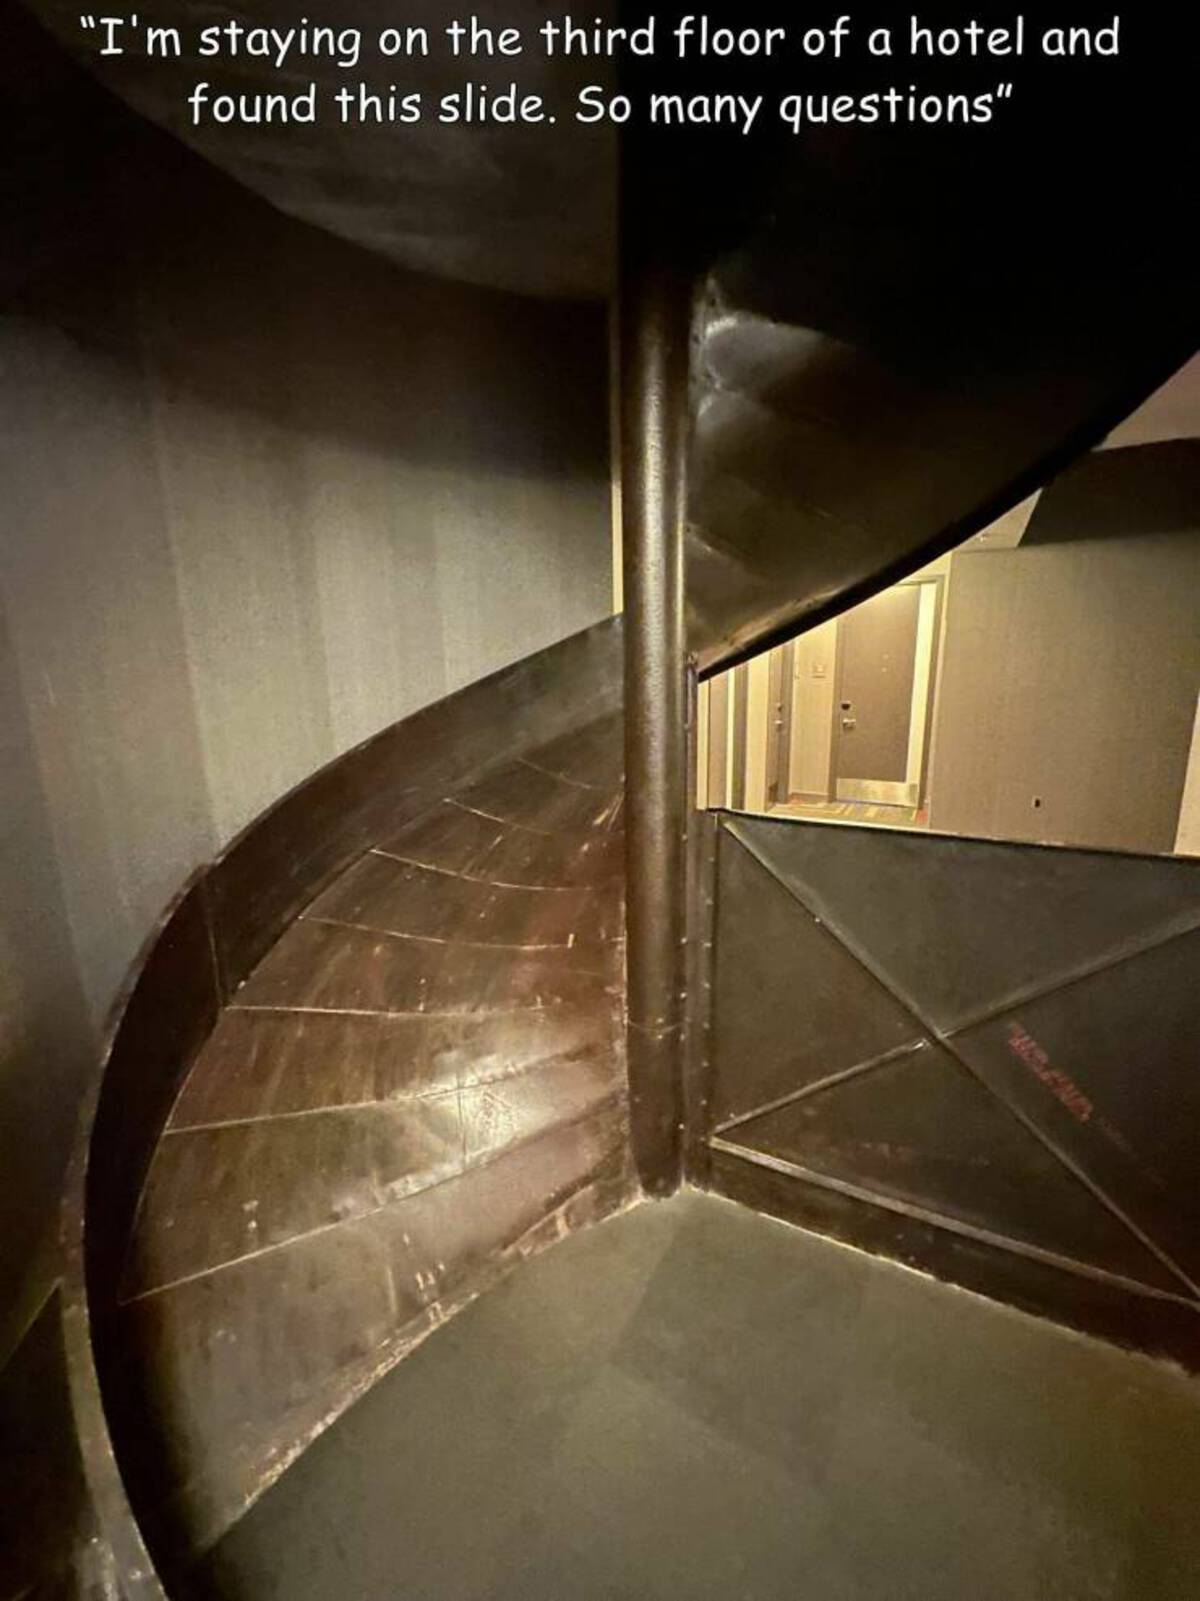 light - "I'm staying on the third floor of a hotel and found this slide. So many questions"